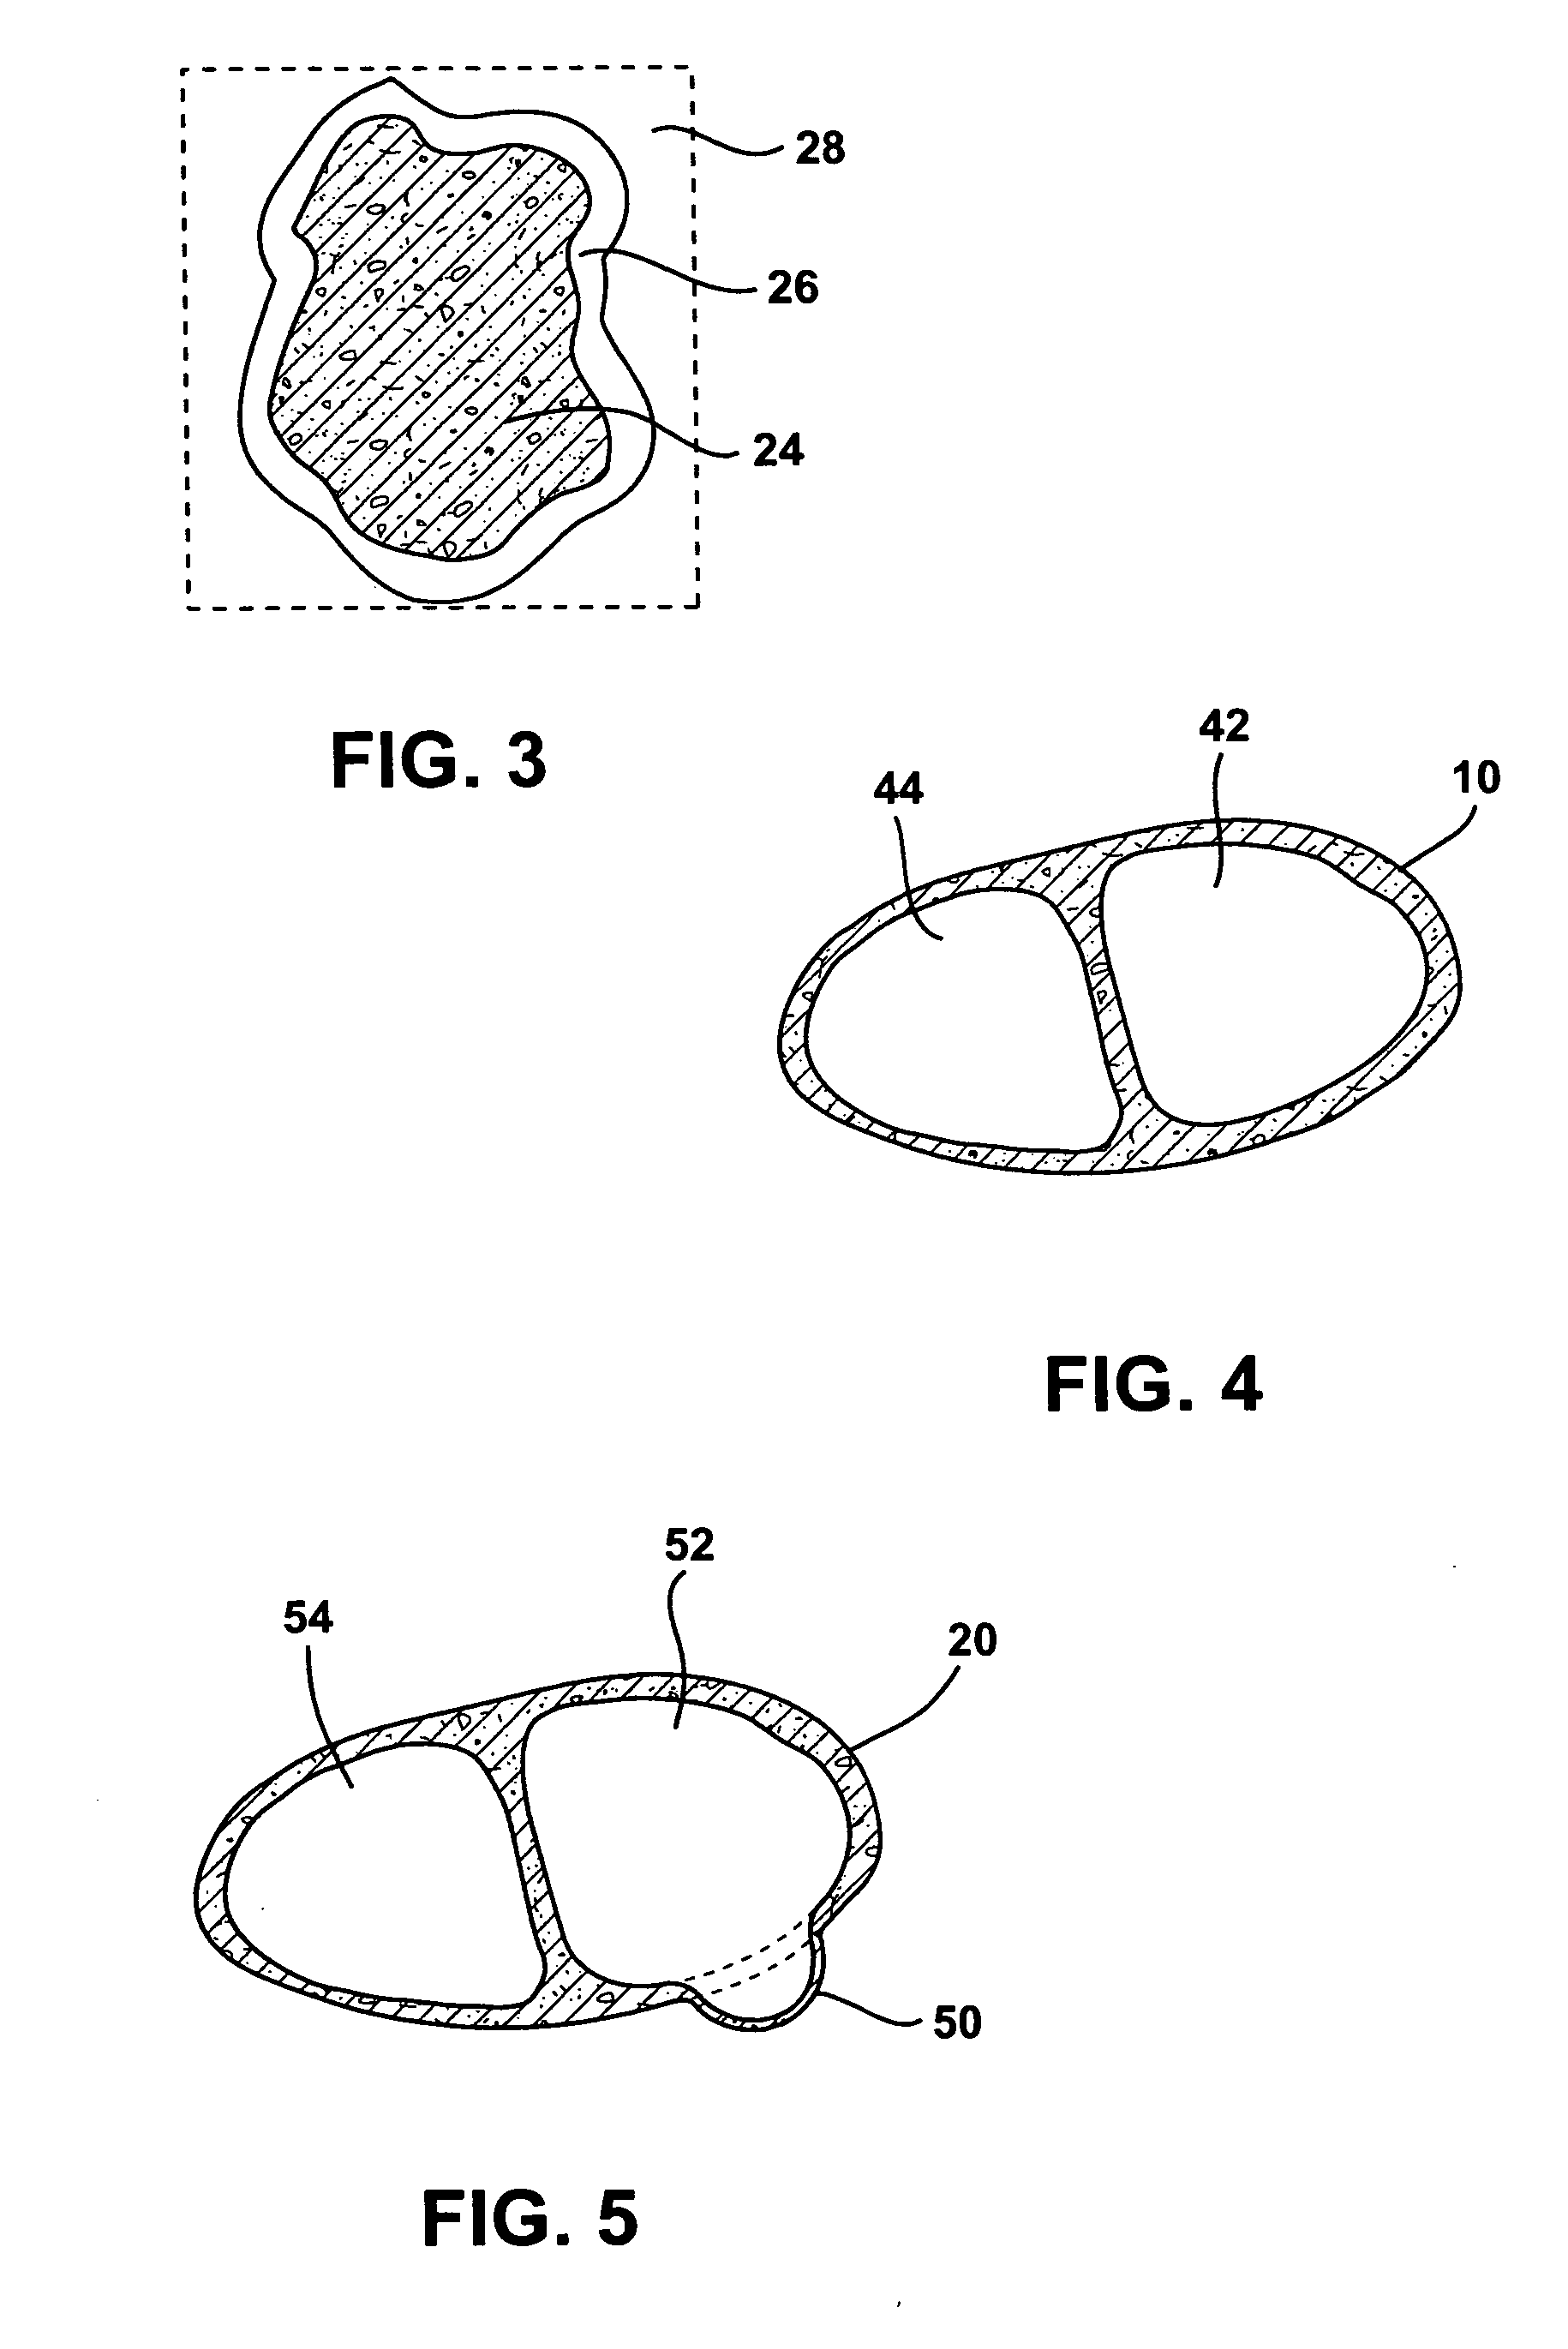 Methods and systems for treating injured cardiac tissue